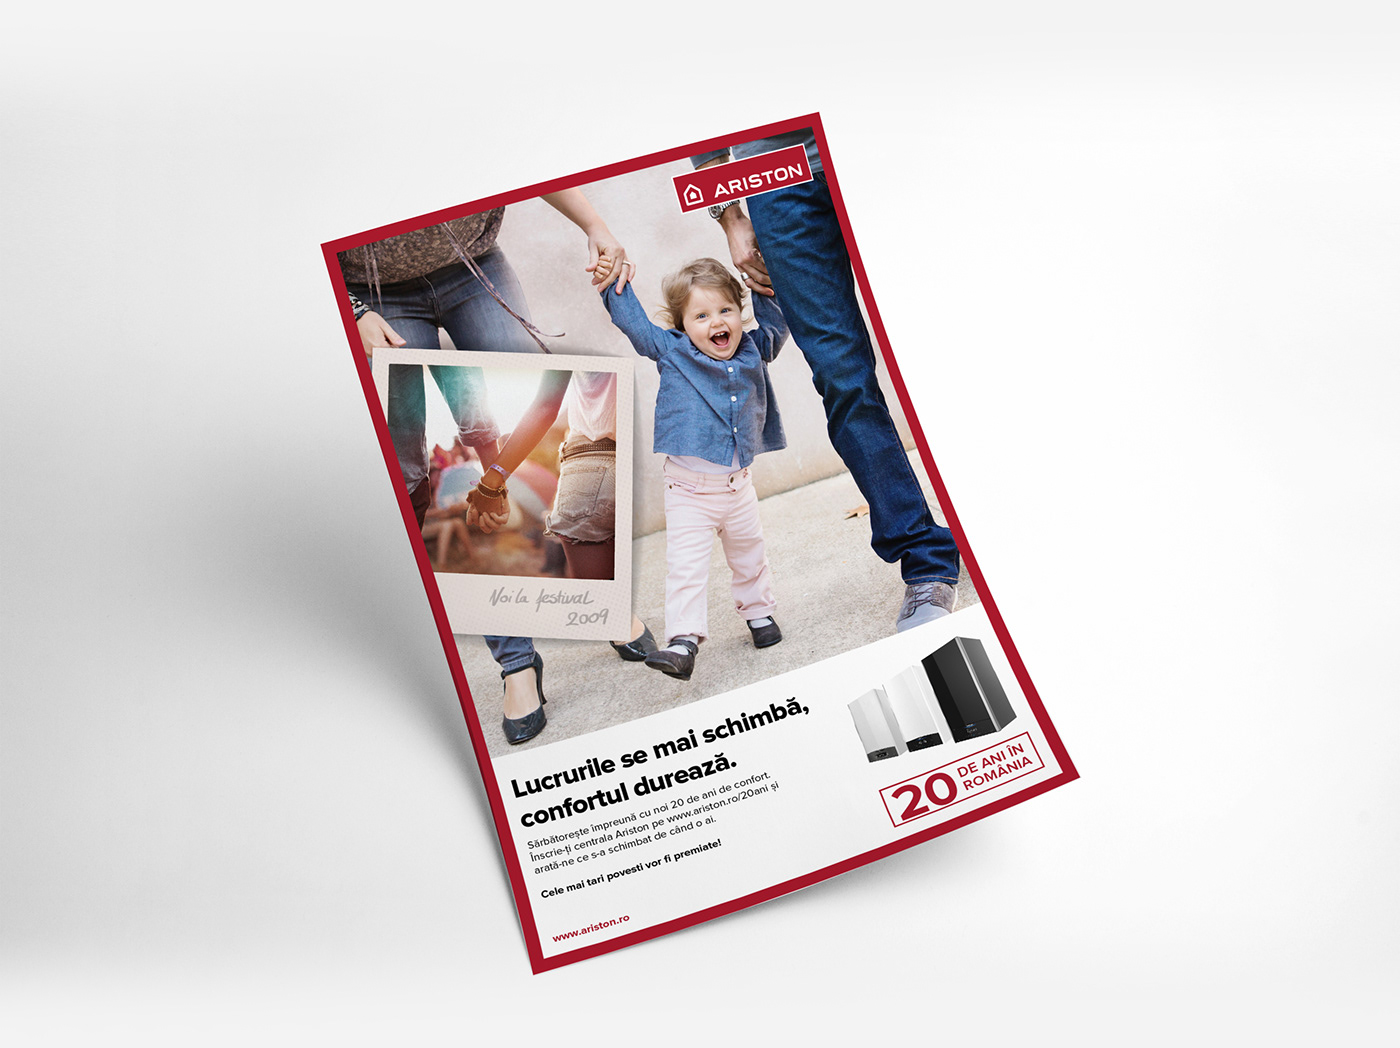 anniversary campaign ariston heating system then and now looking back key visual online video